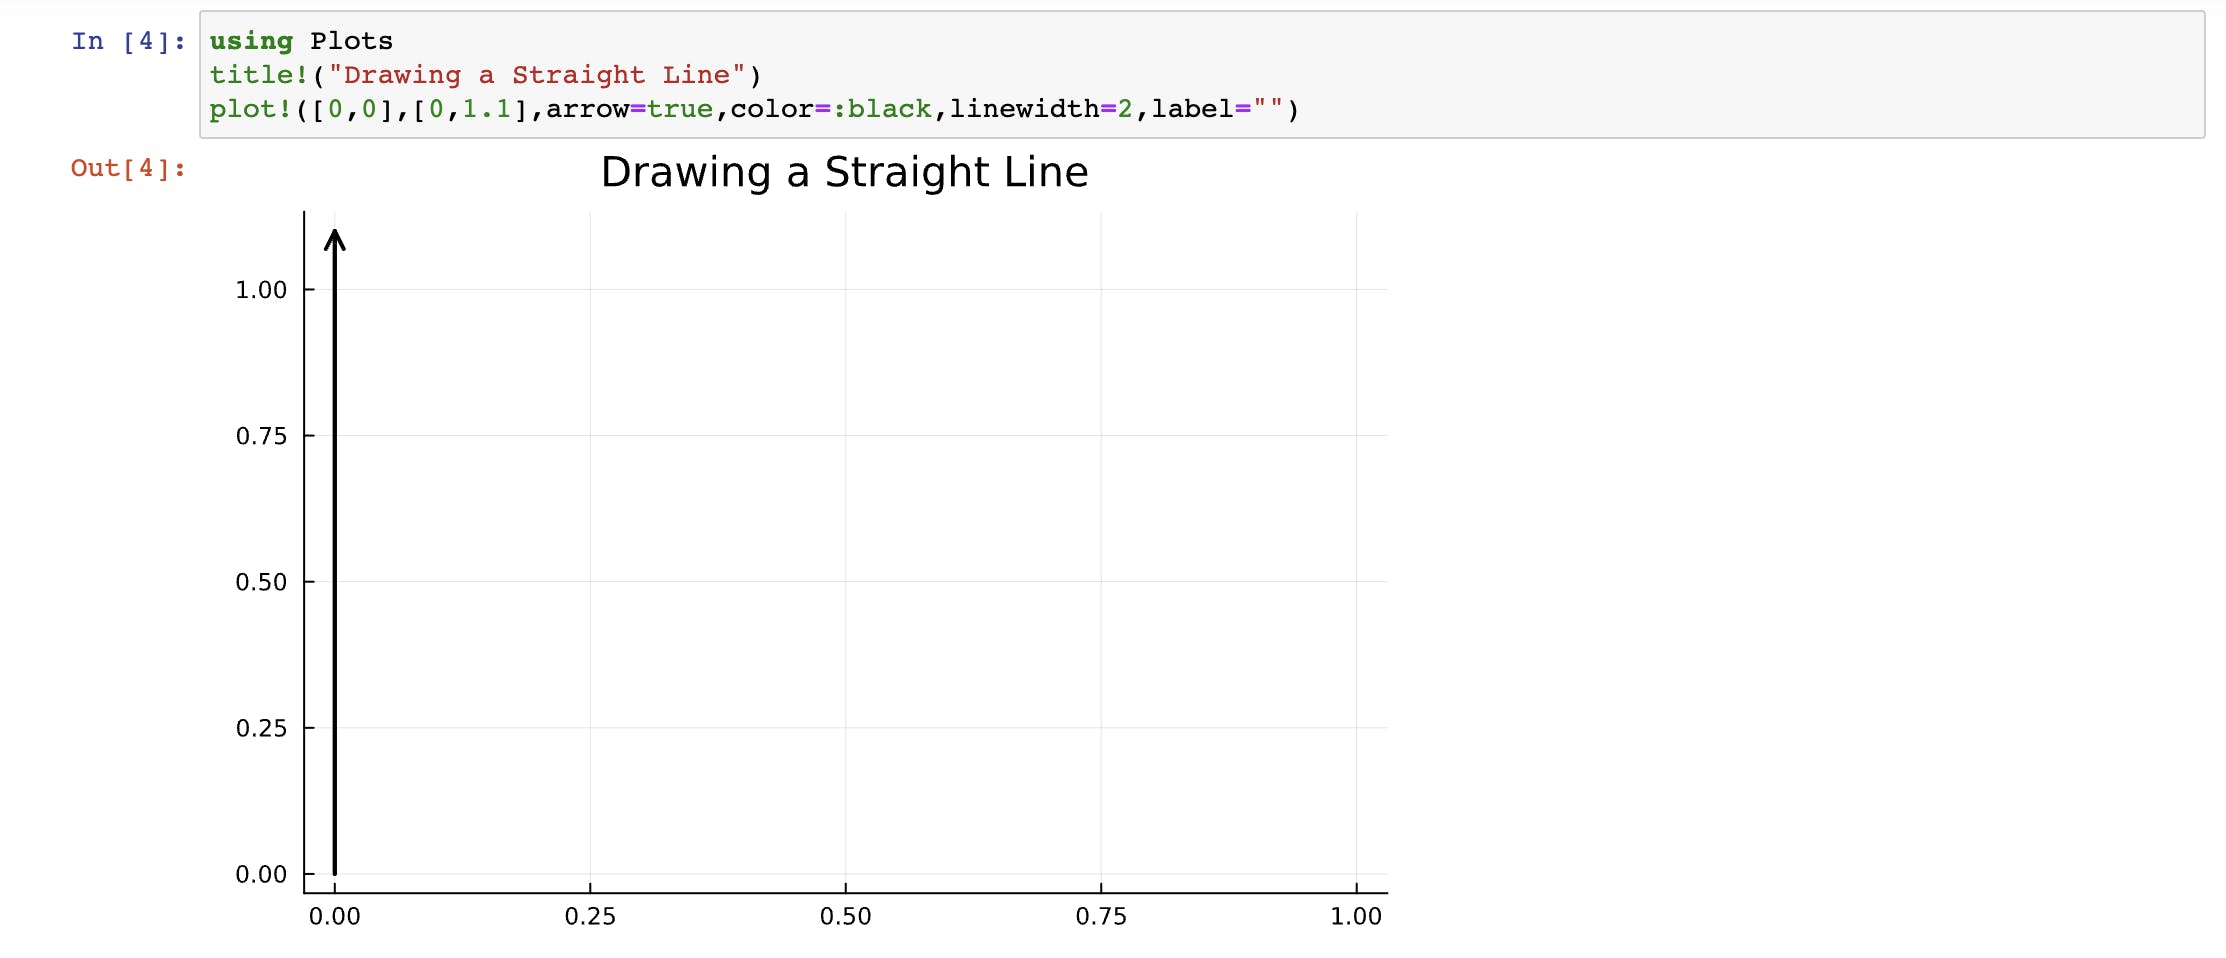 Image of a Straight line plot.